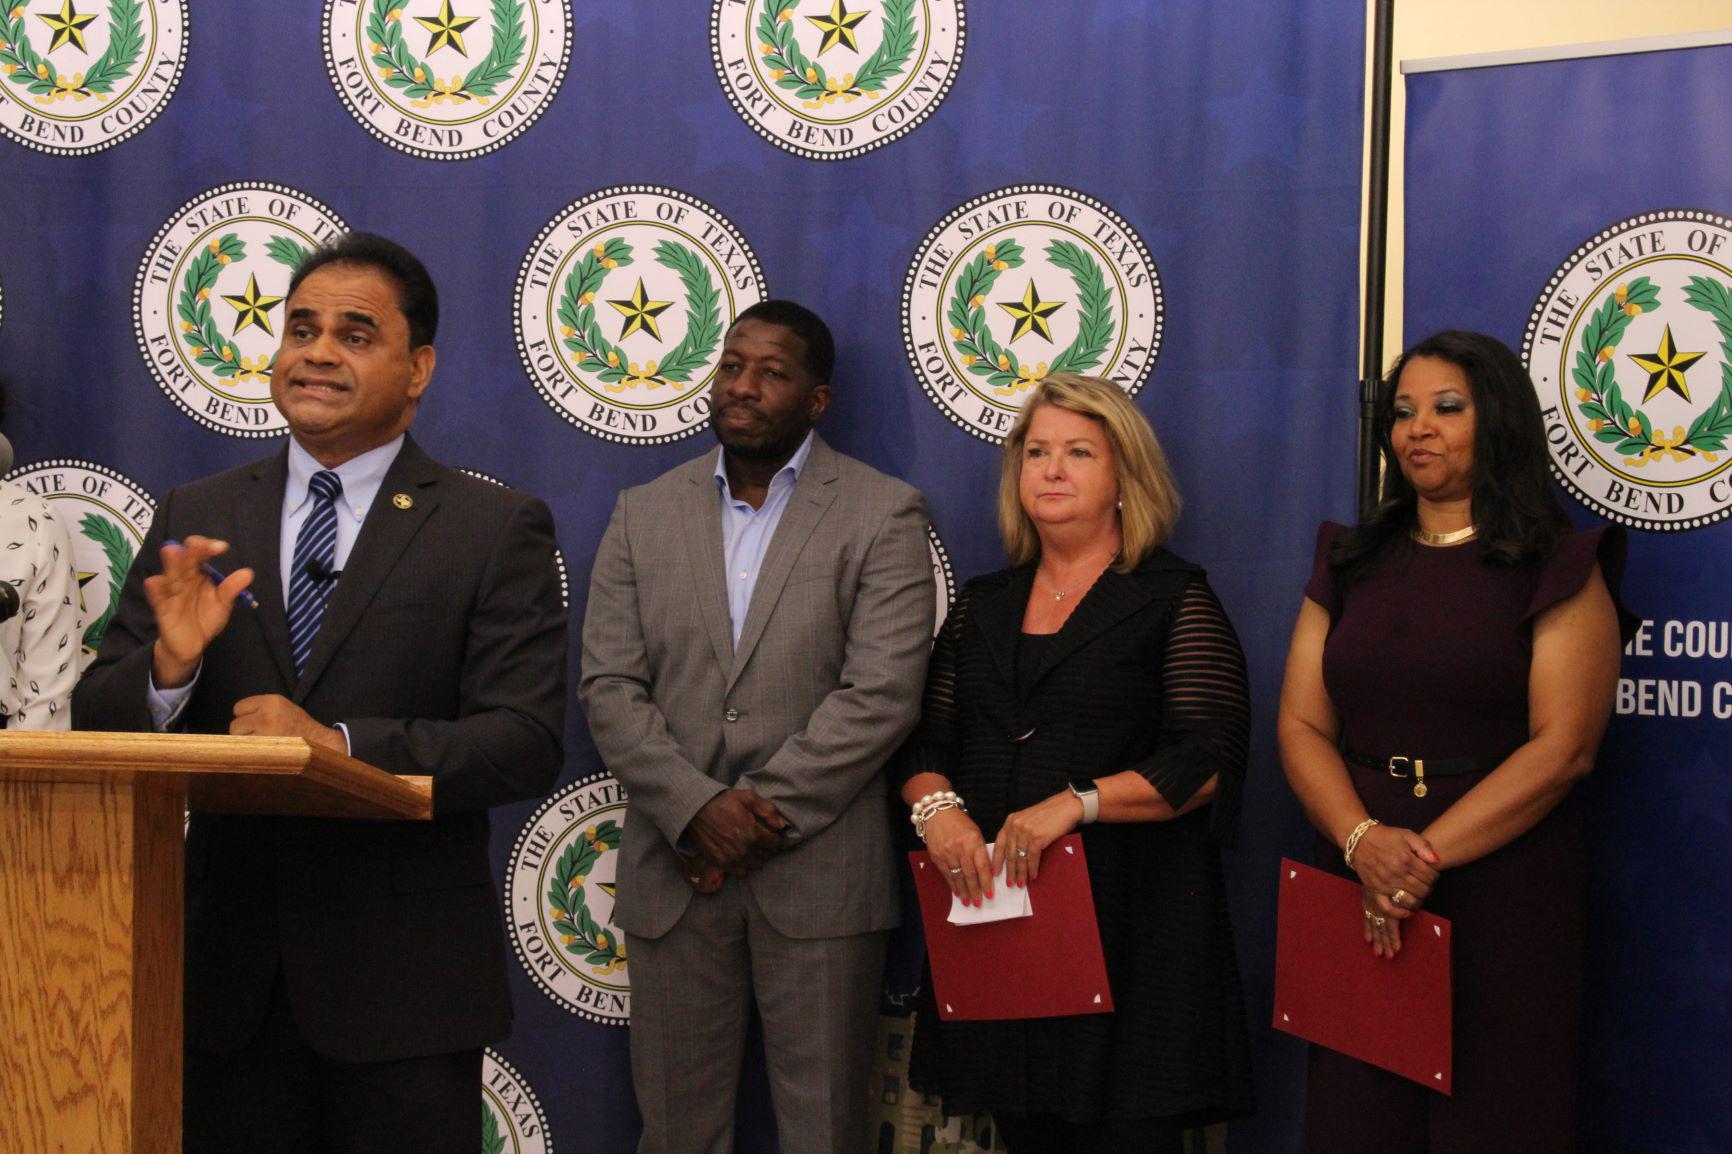 Decide KP George touts Fort Bend County’s compact company agenda